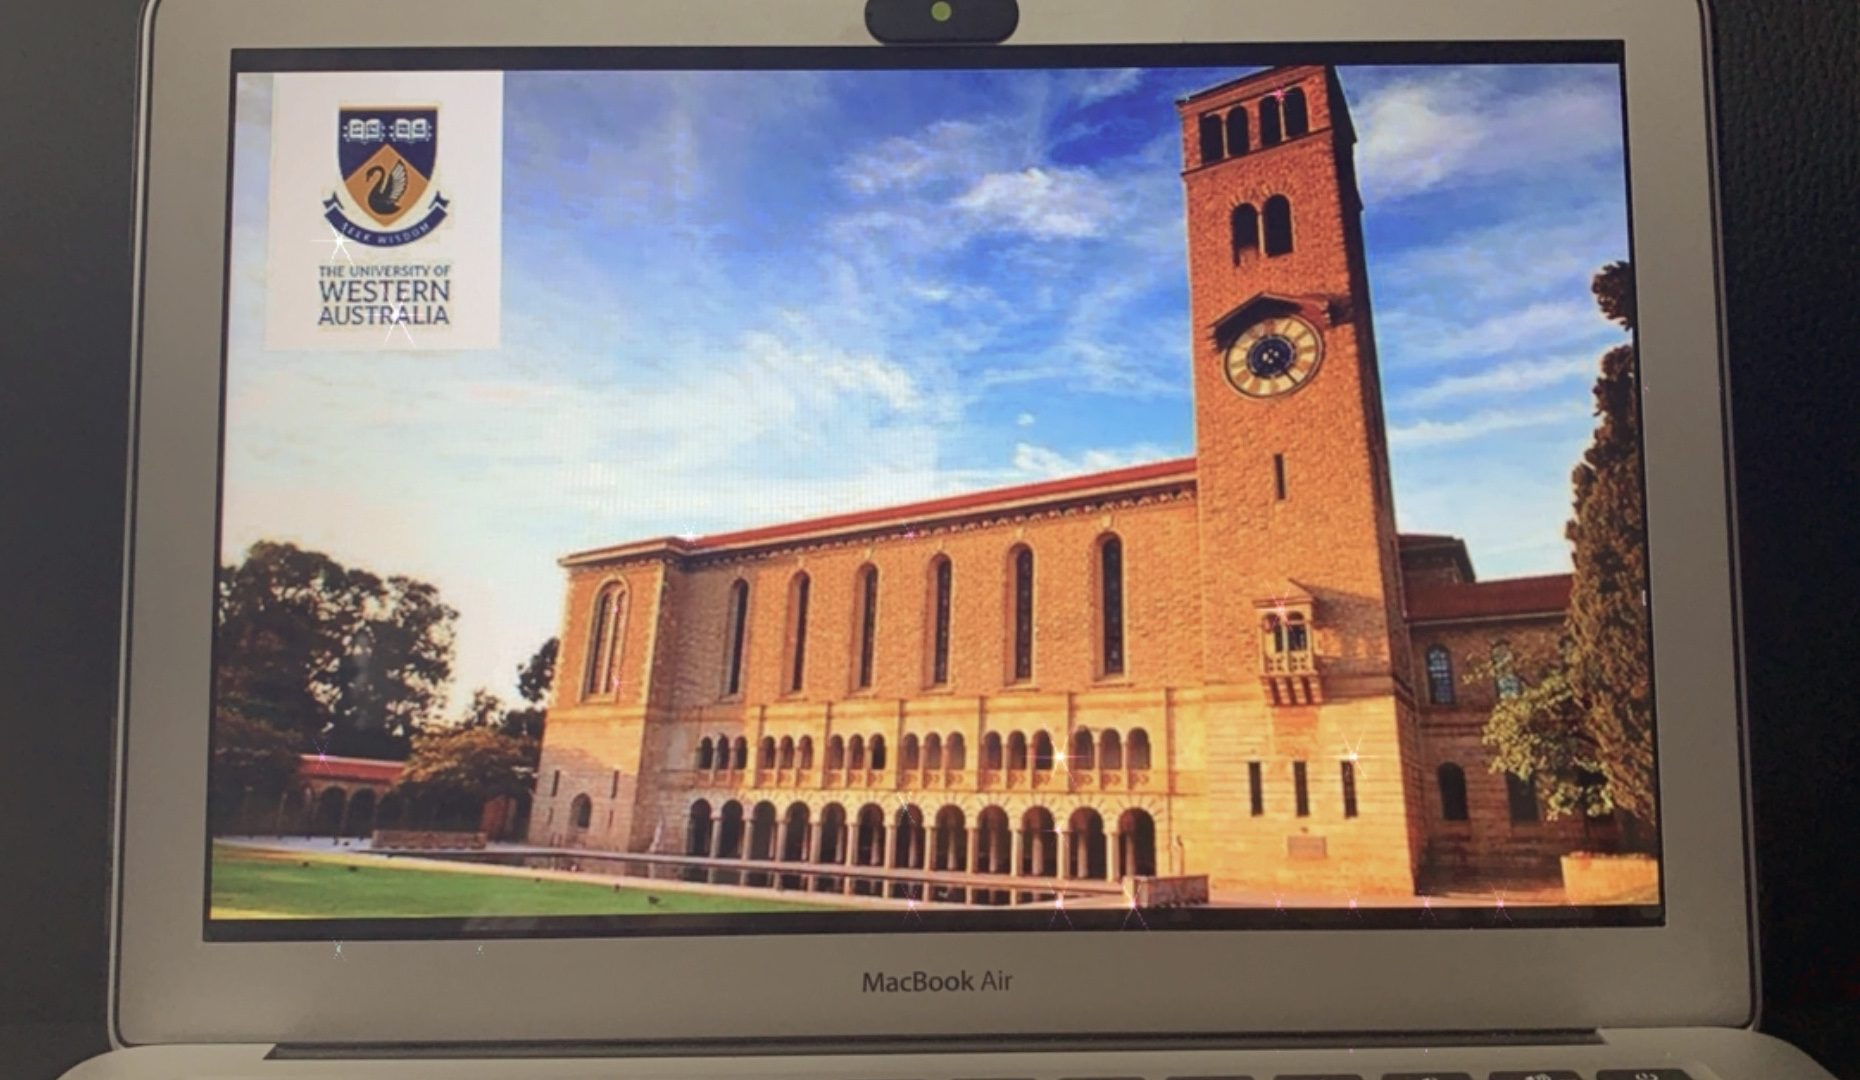 MacBook Air with a picture of the UWA building on the screen